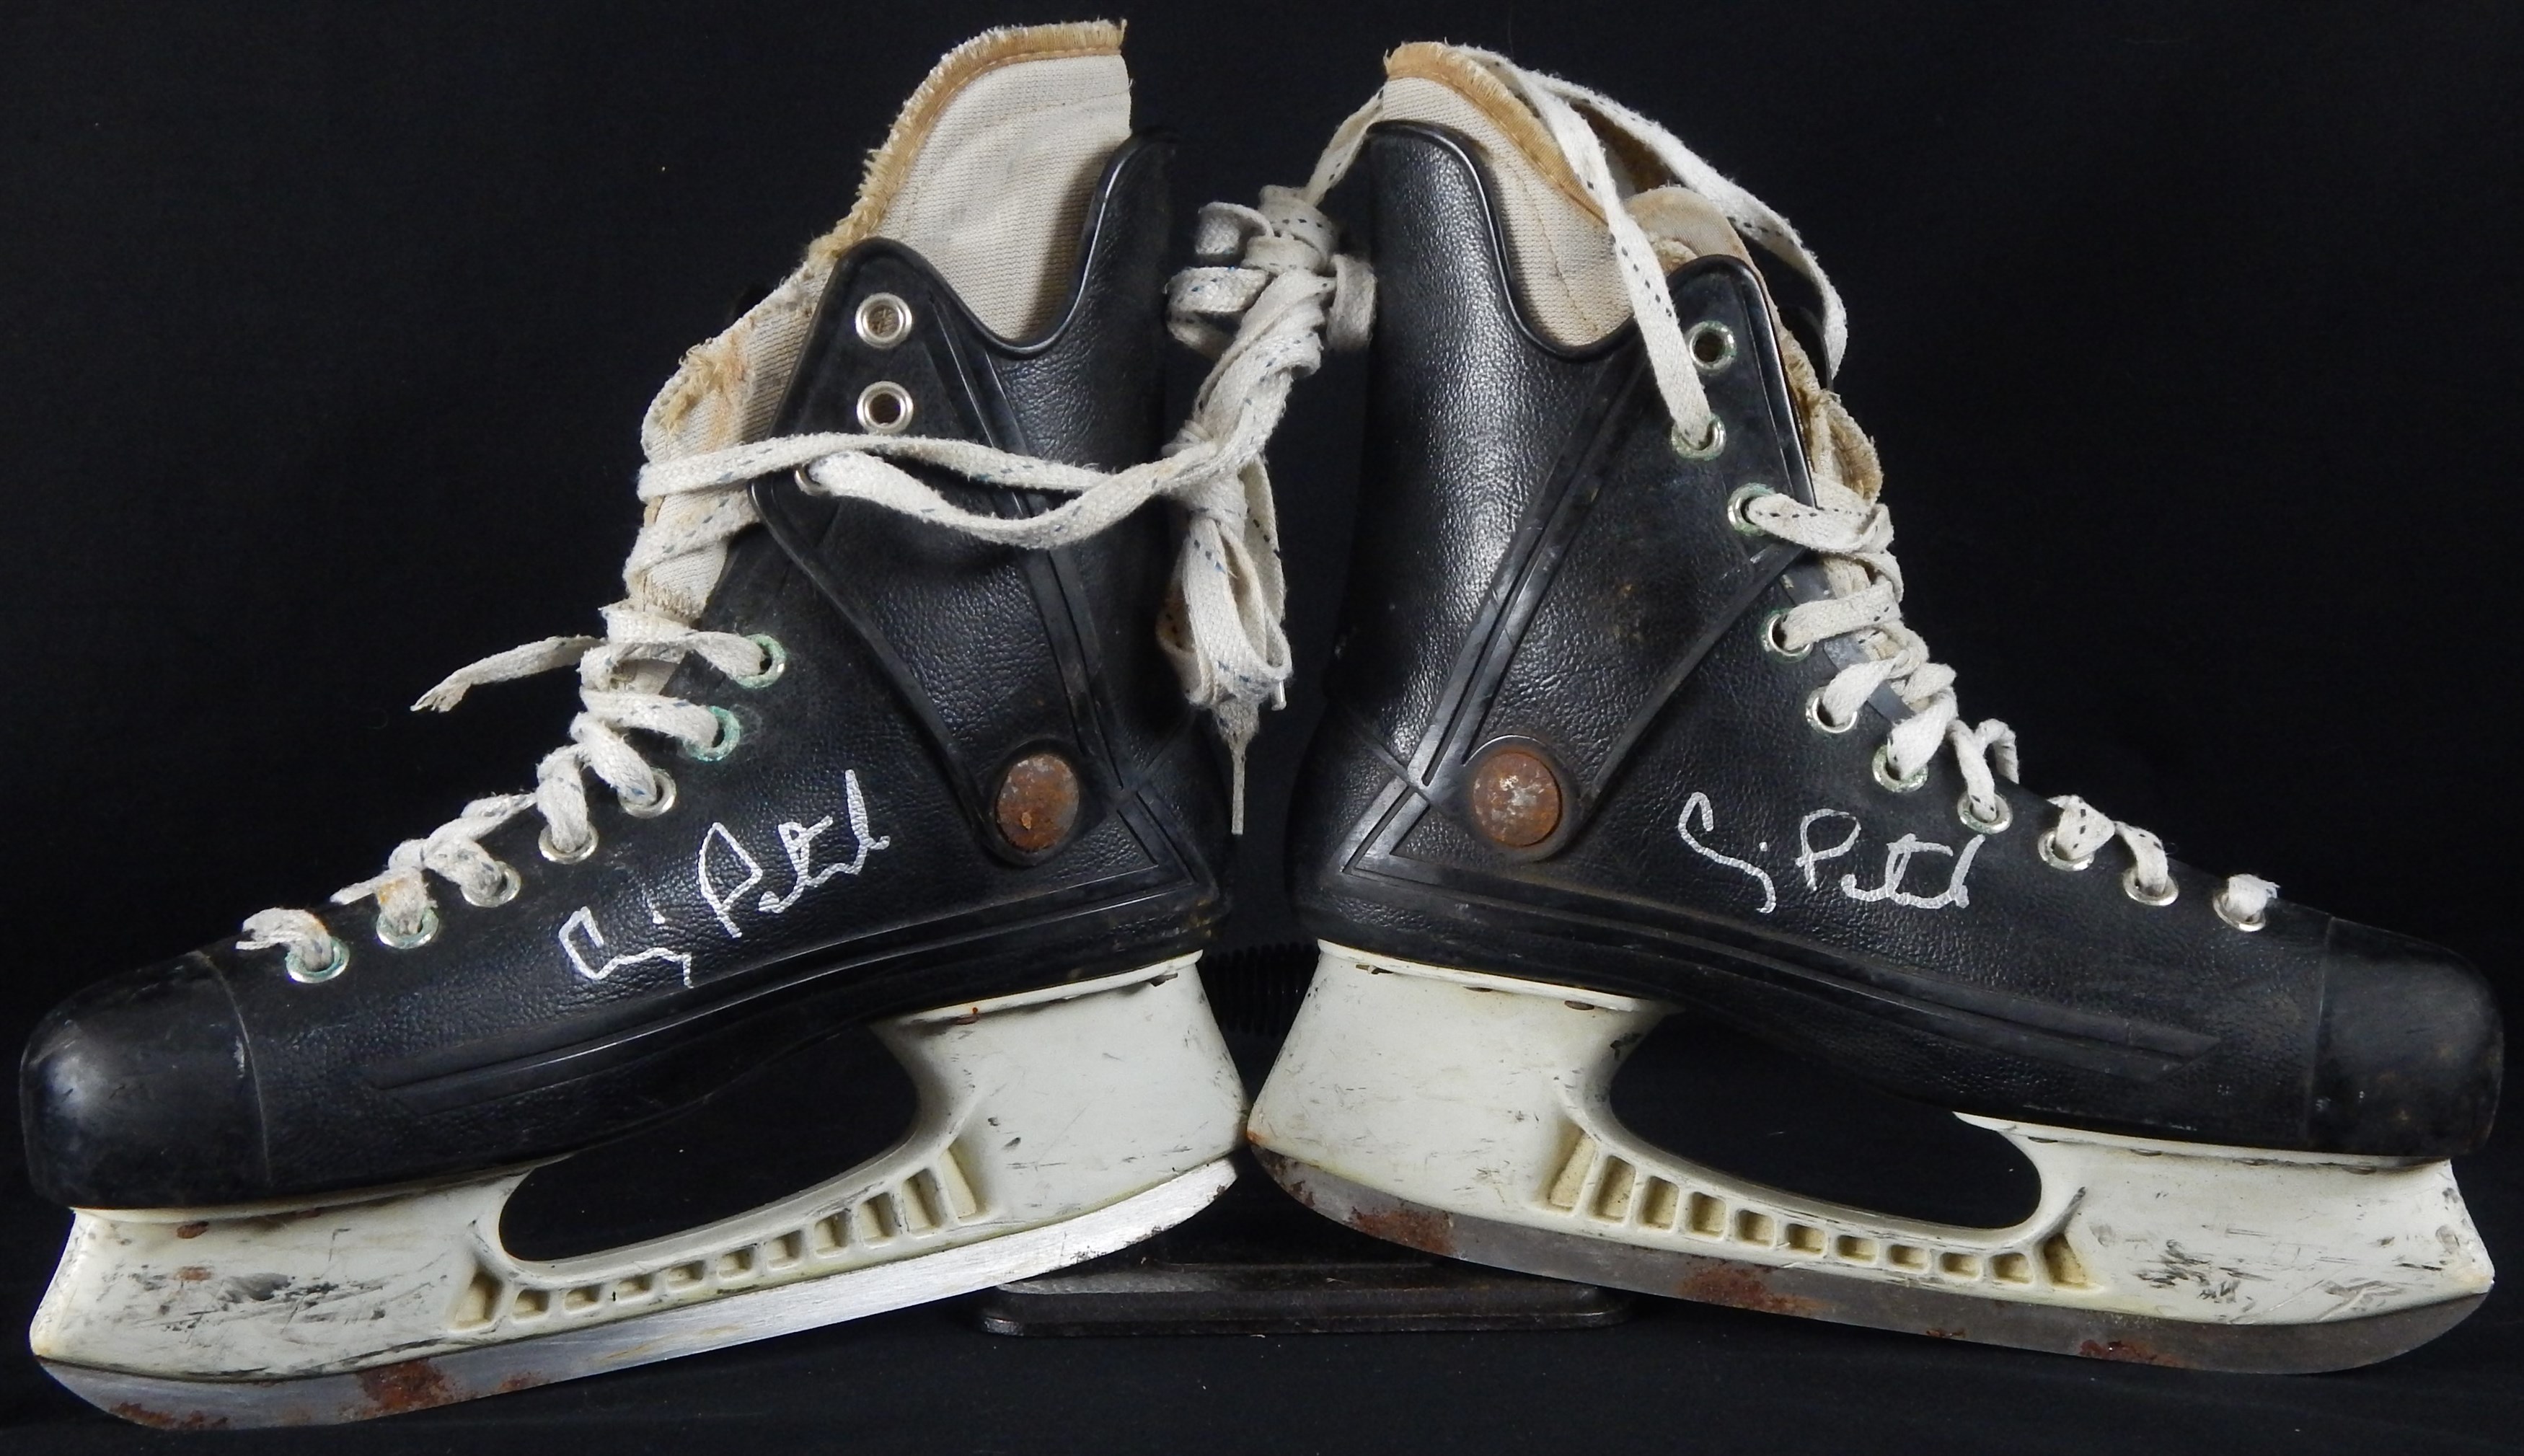 The Craig Patrick Hockey Collection - Craig Patrick Game Used and Signed Skates From Patrick Himself